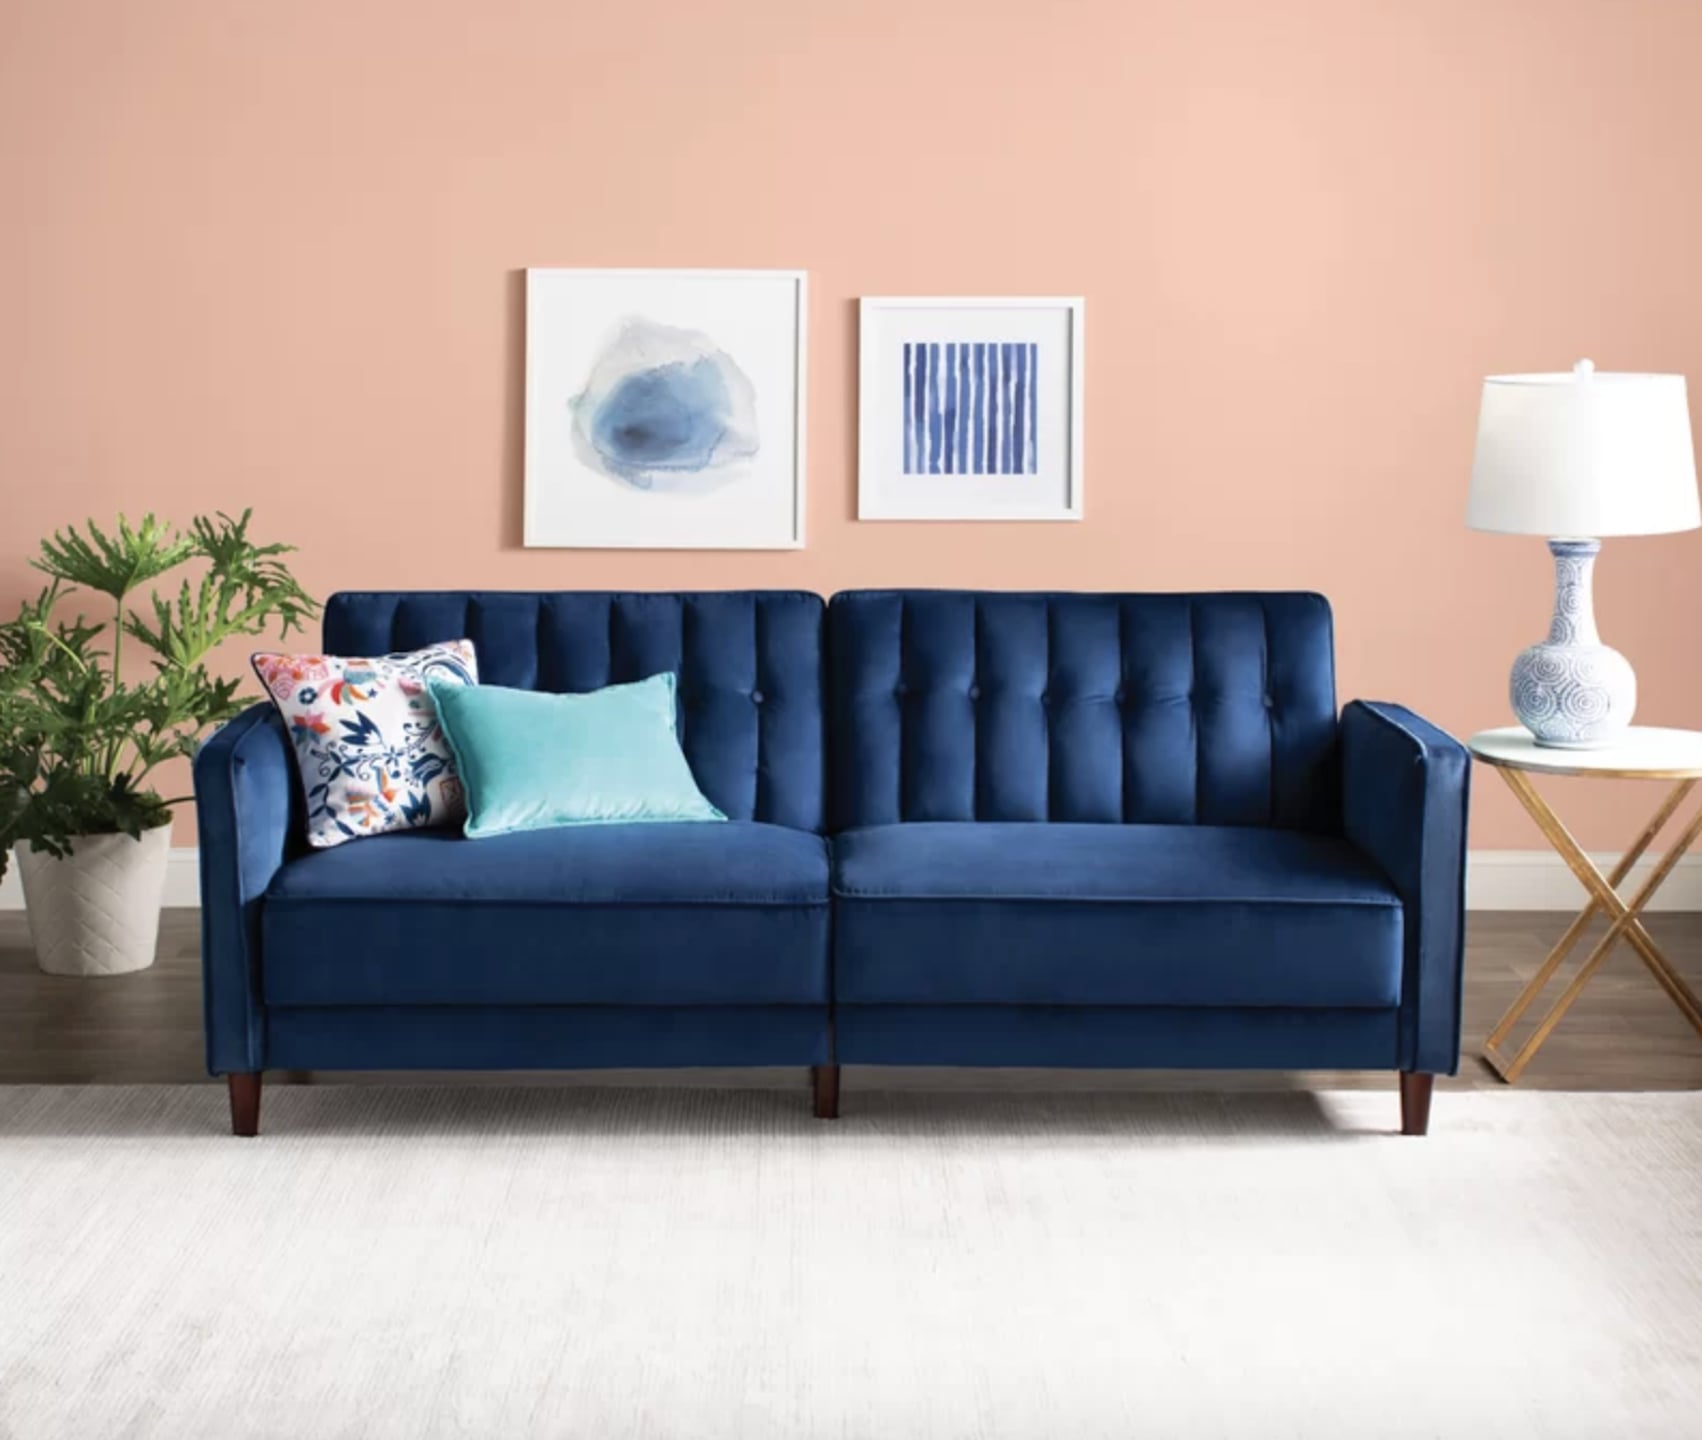 Most Popular and Bestselling Furniture From Wayfair | POPSUGAR Home